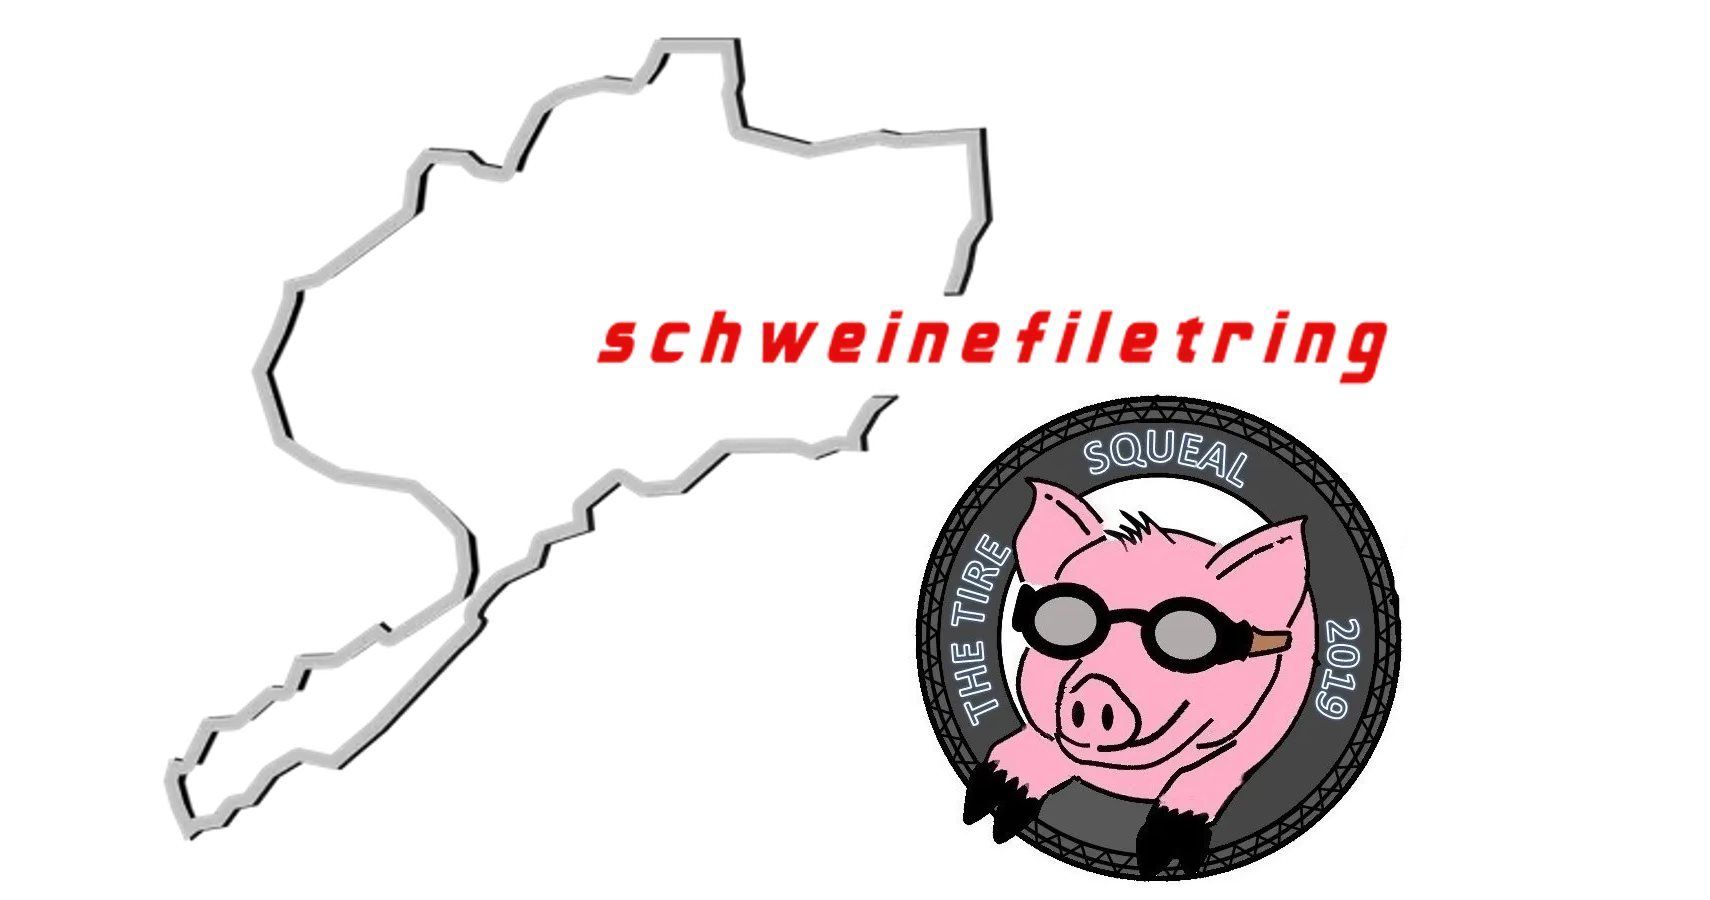 Can't Get To Germany? Try The Schweinefiletring, Indiana's Nurburgring & Pork-Themed Charity Rally